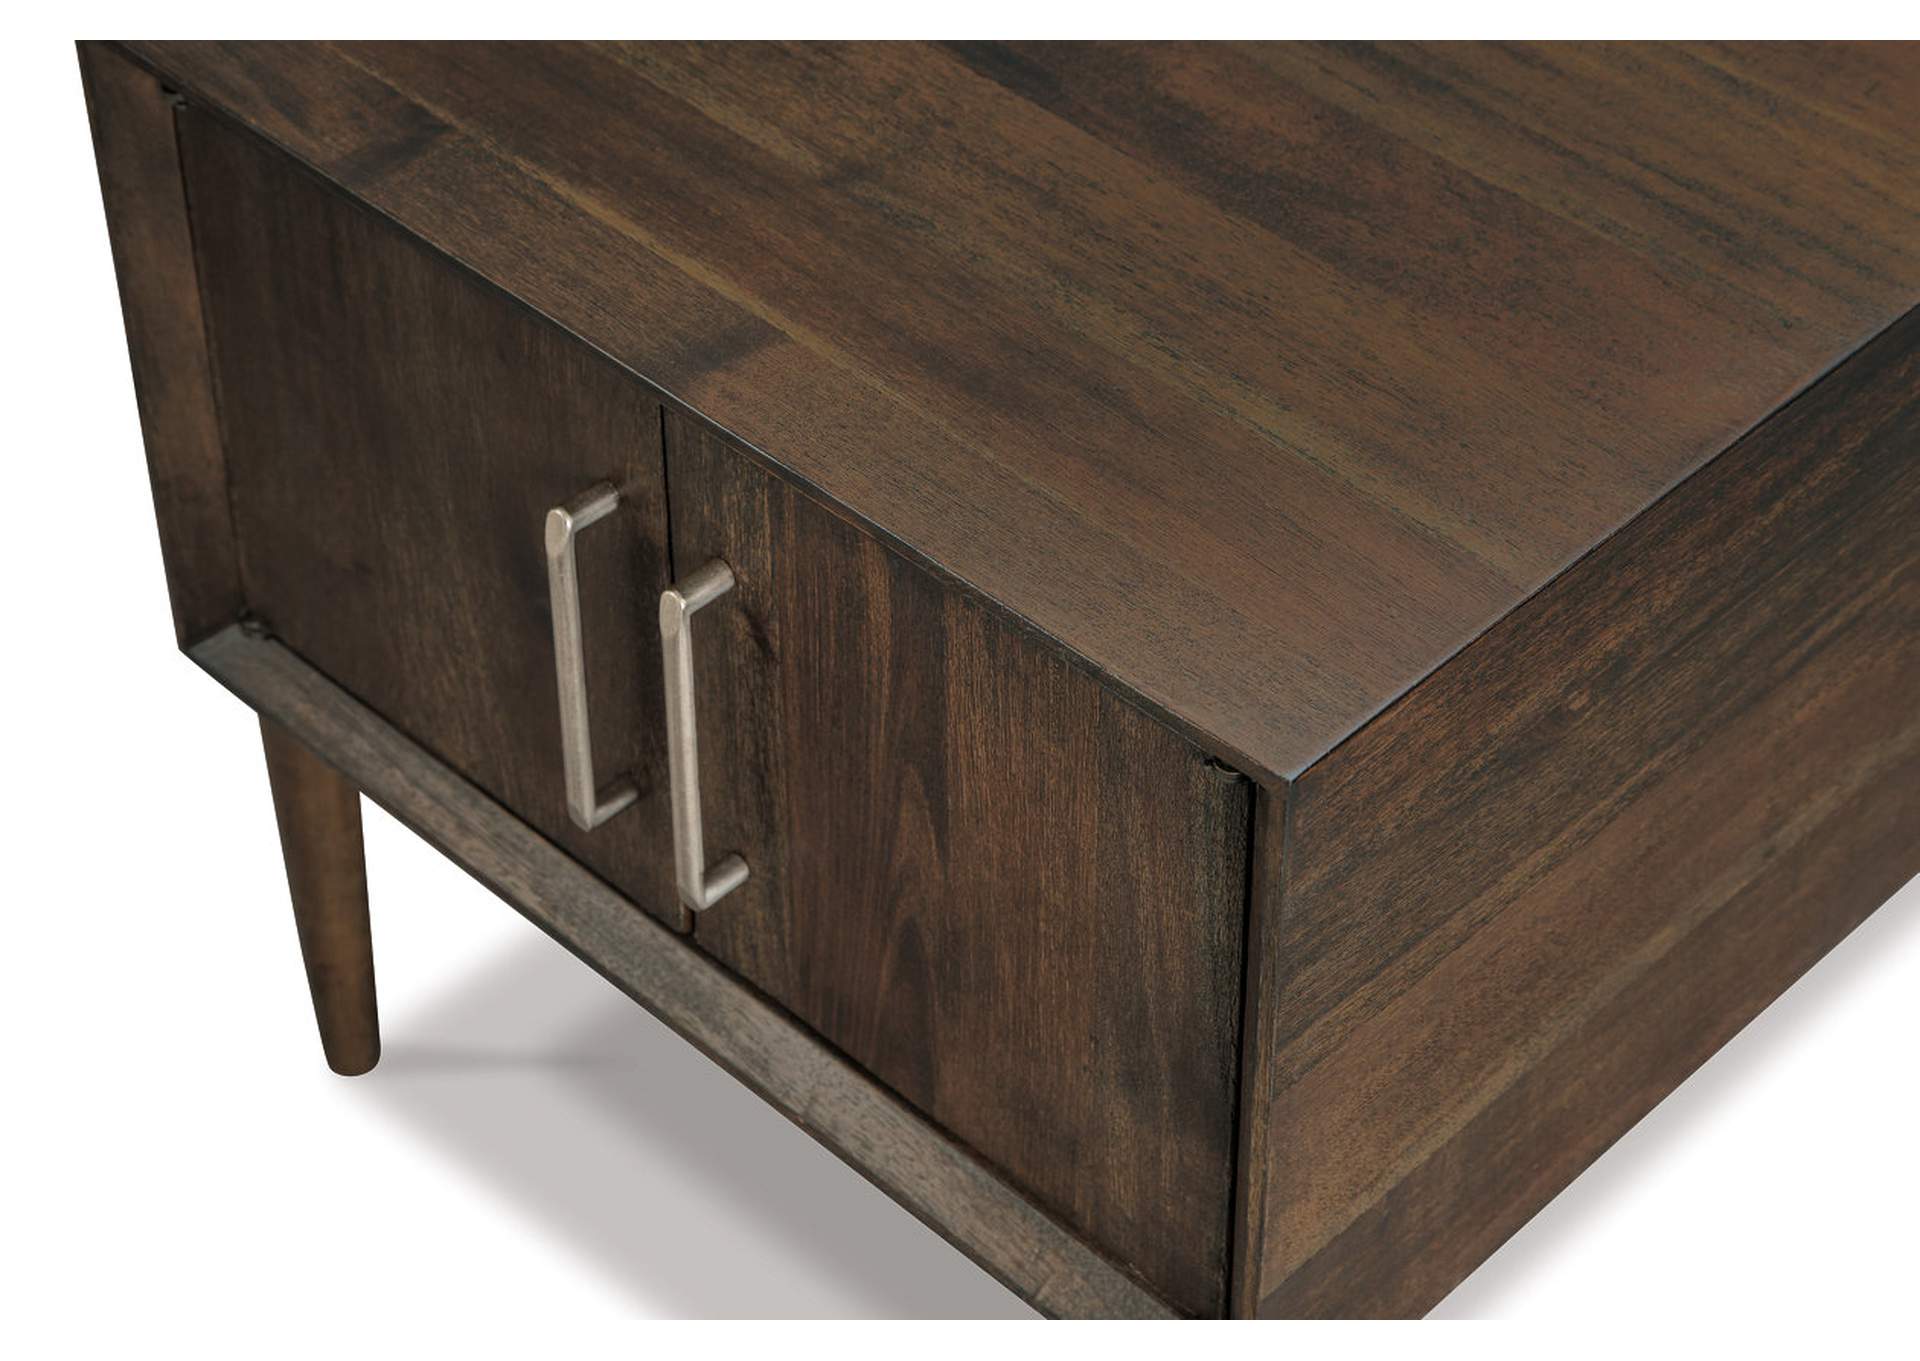 Kisper End Table,Direct To Consumer Express